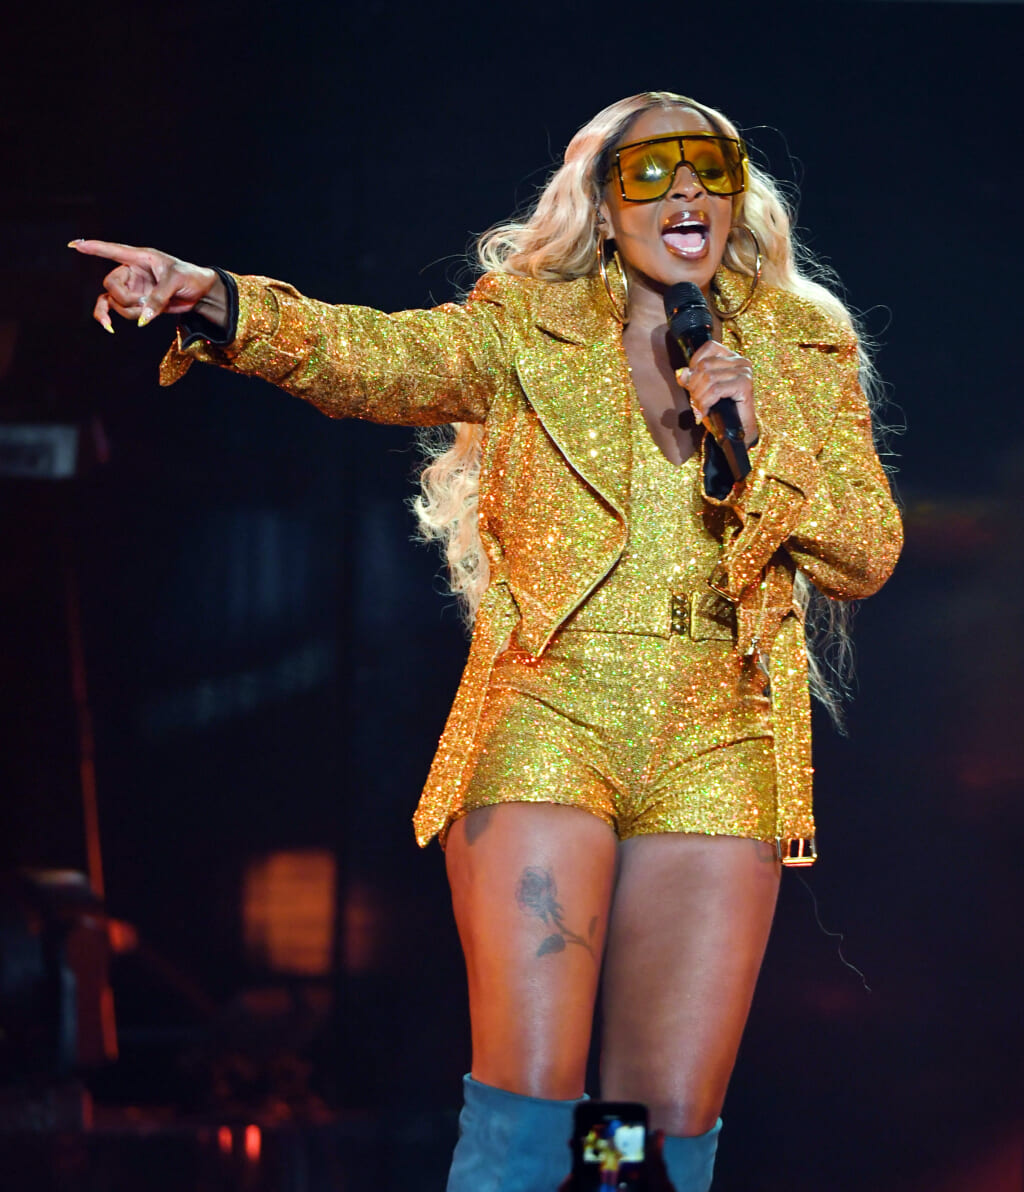 Mary J. Blige is next artist in Apple Music concert series